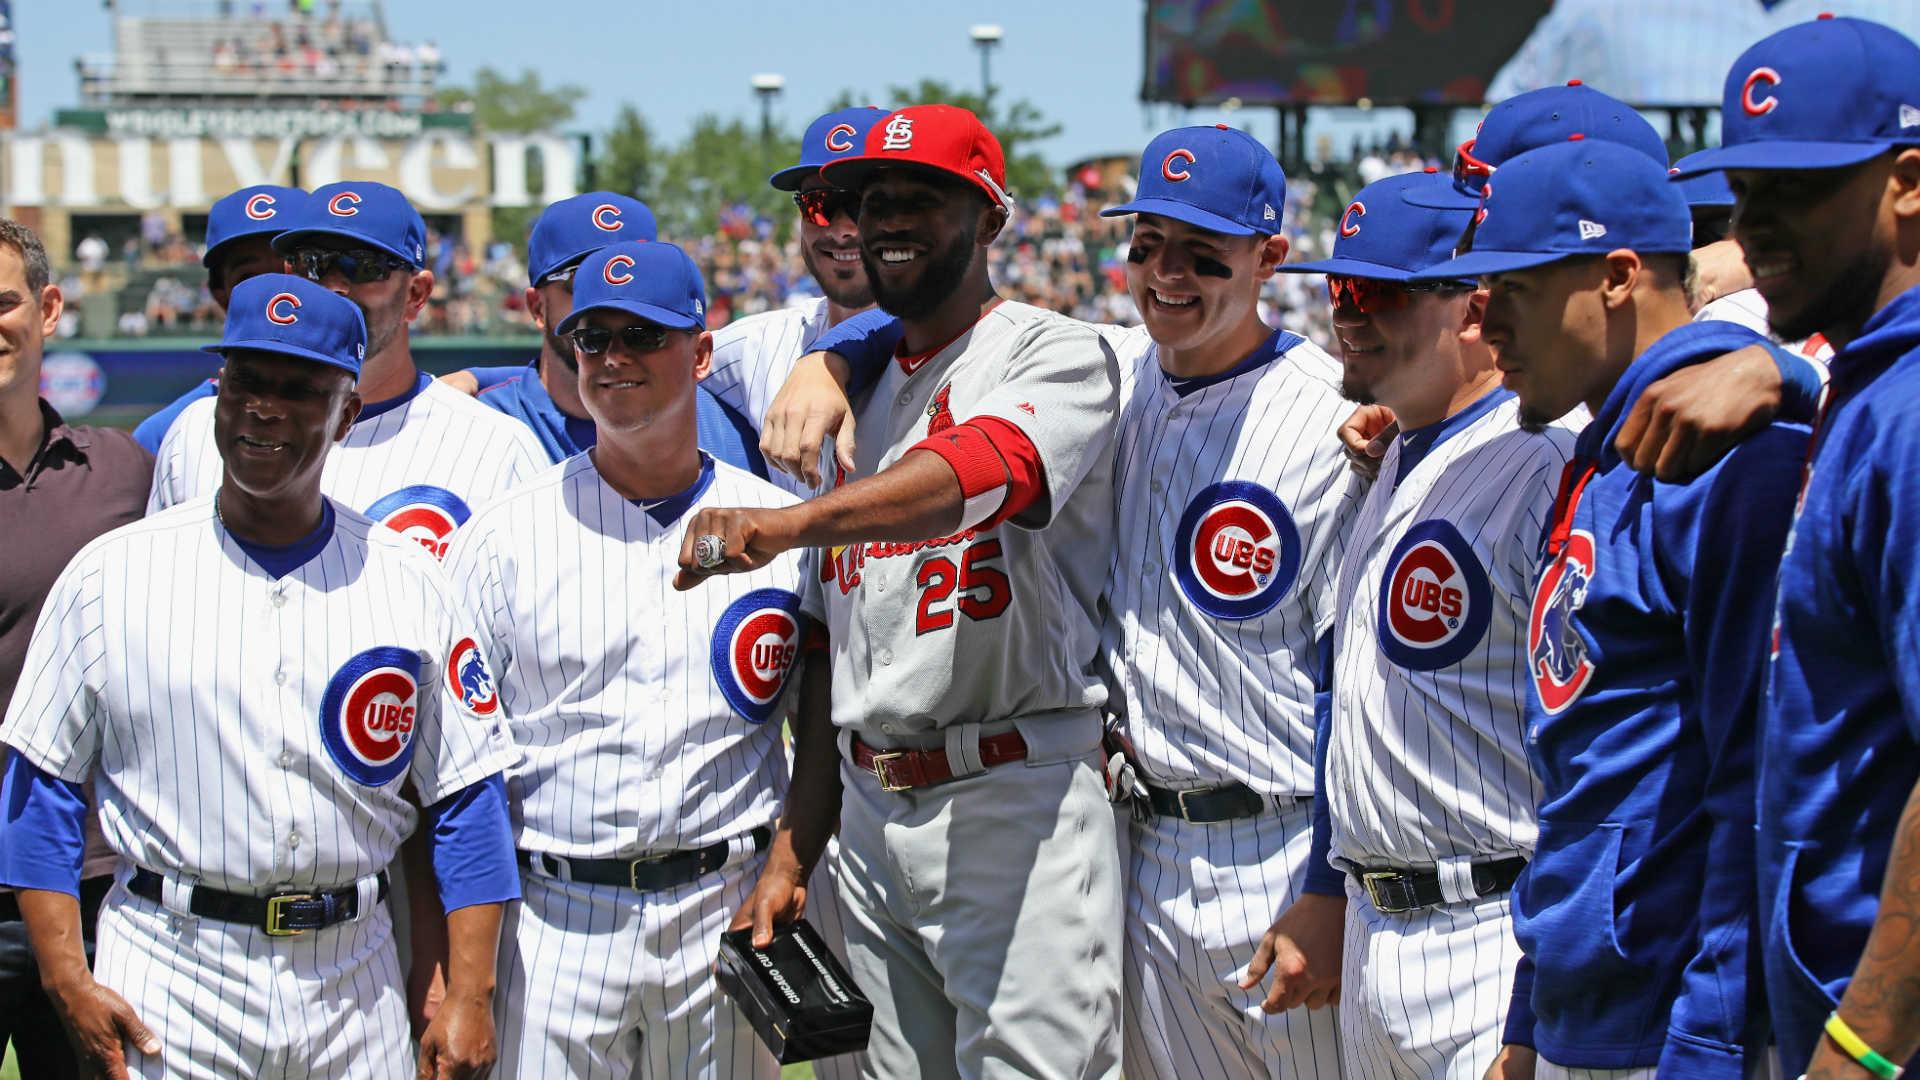 Dexter Fowler gets Cubs World Series ring, promptly homers off John